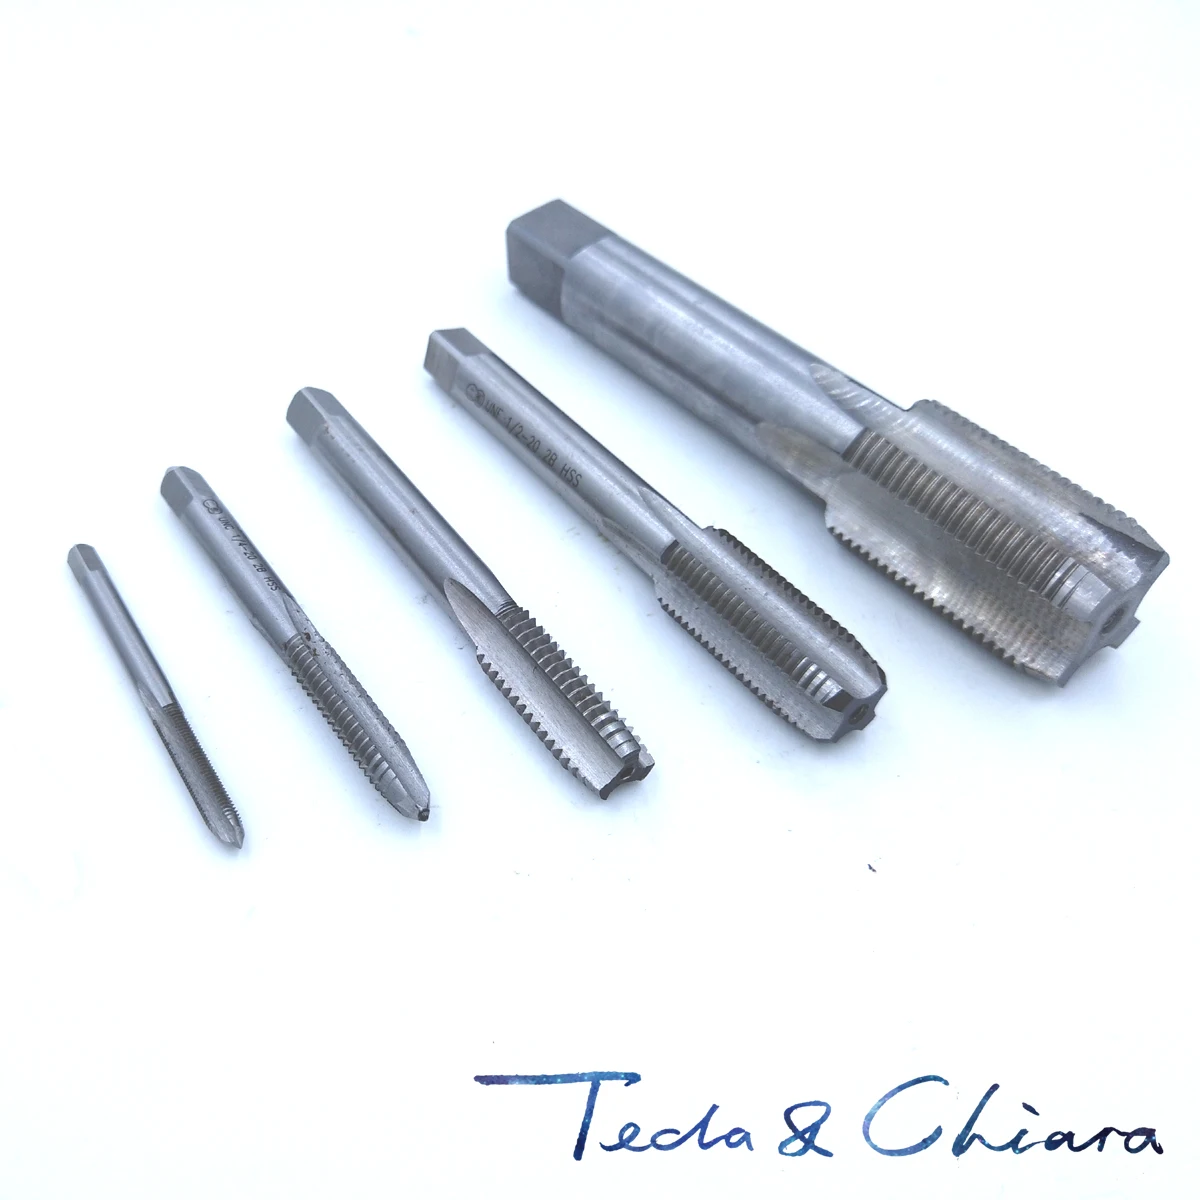 M30 Metric Left Hand Machine Thread Tap Threading Tools For Stainless Steel M3 